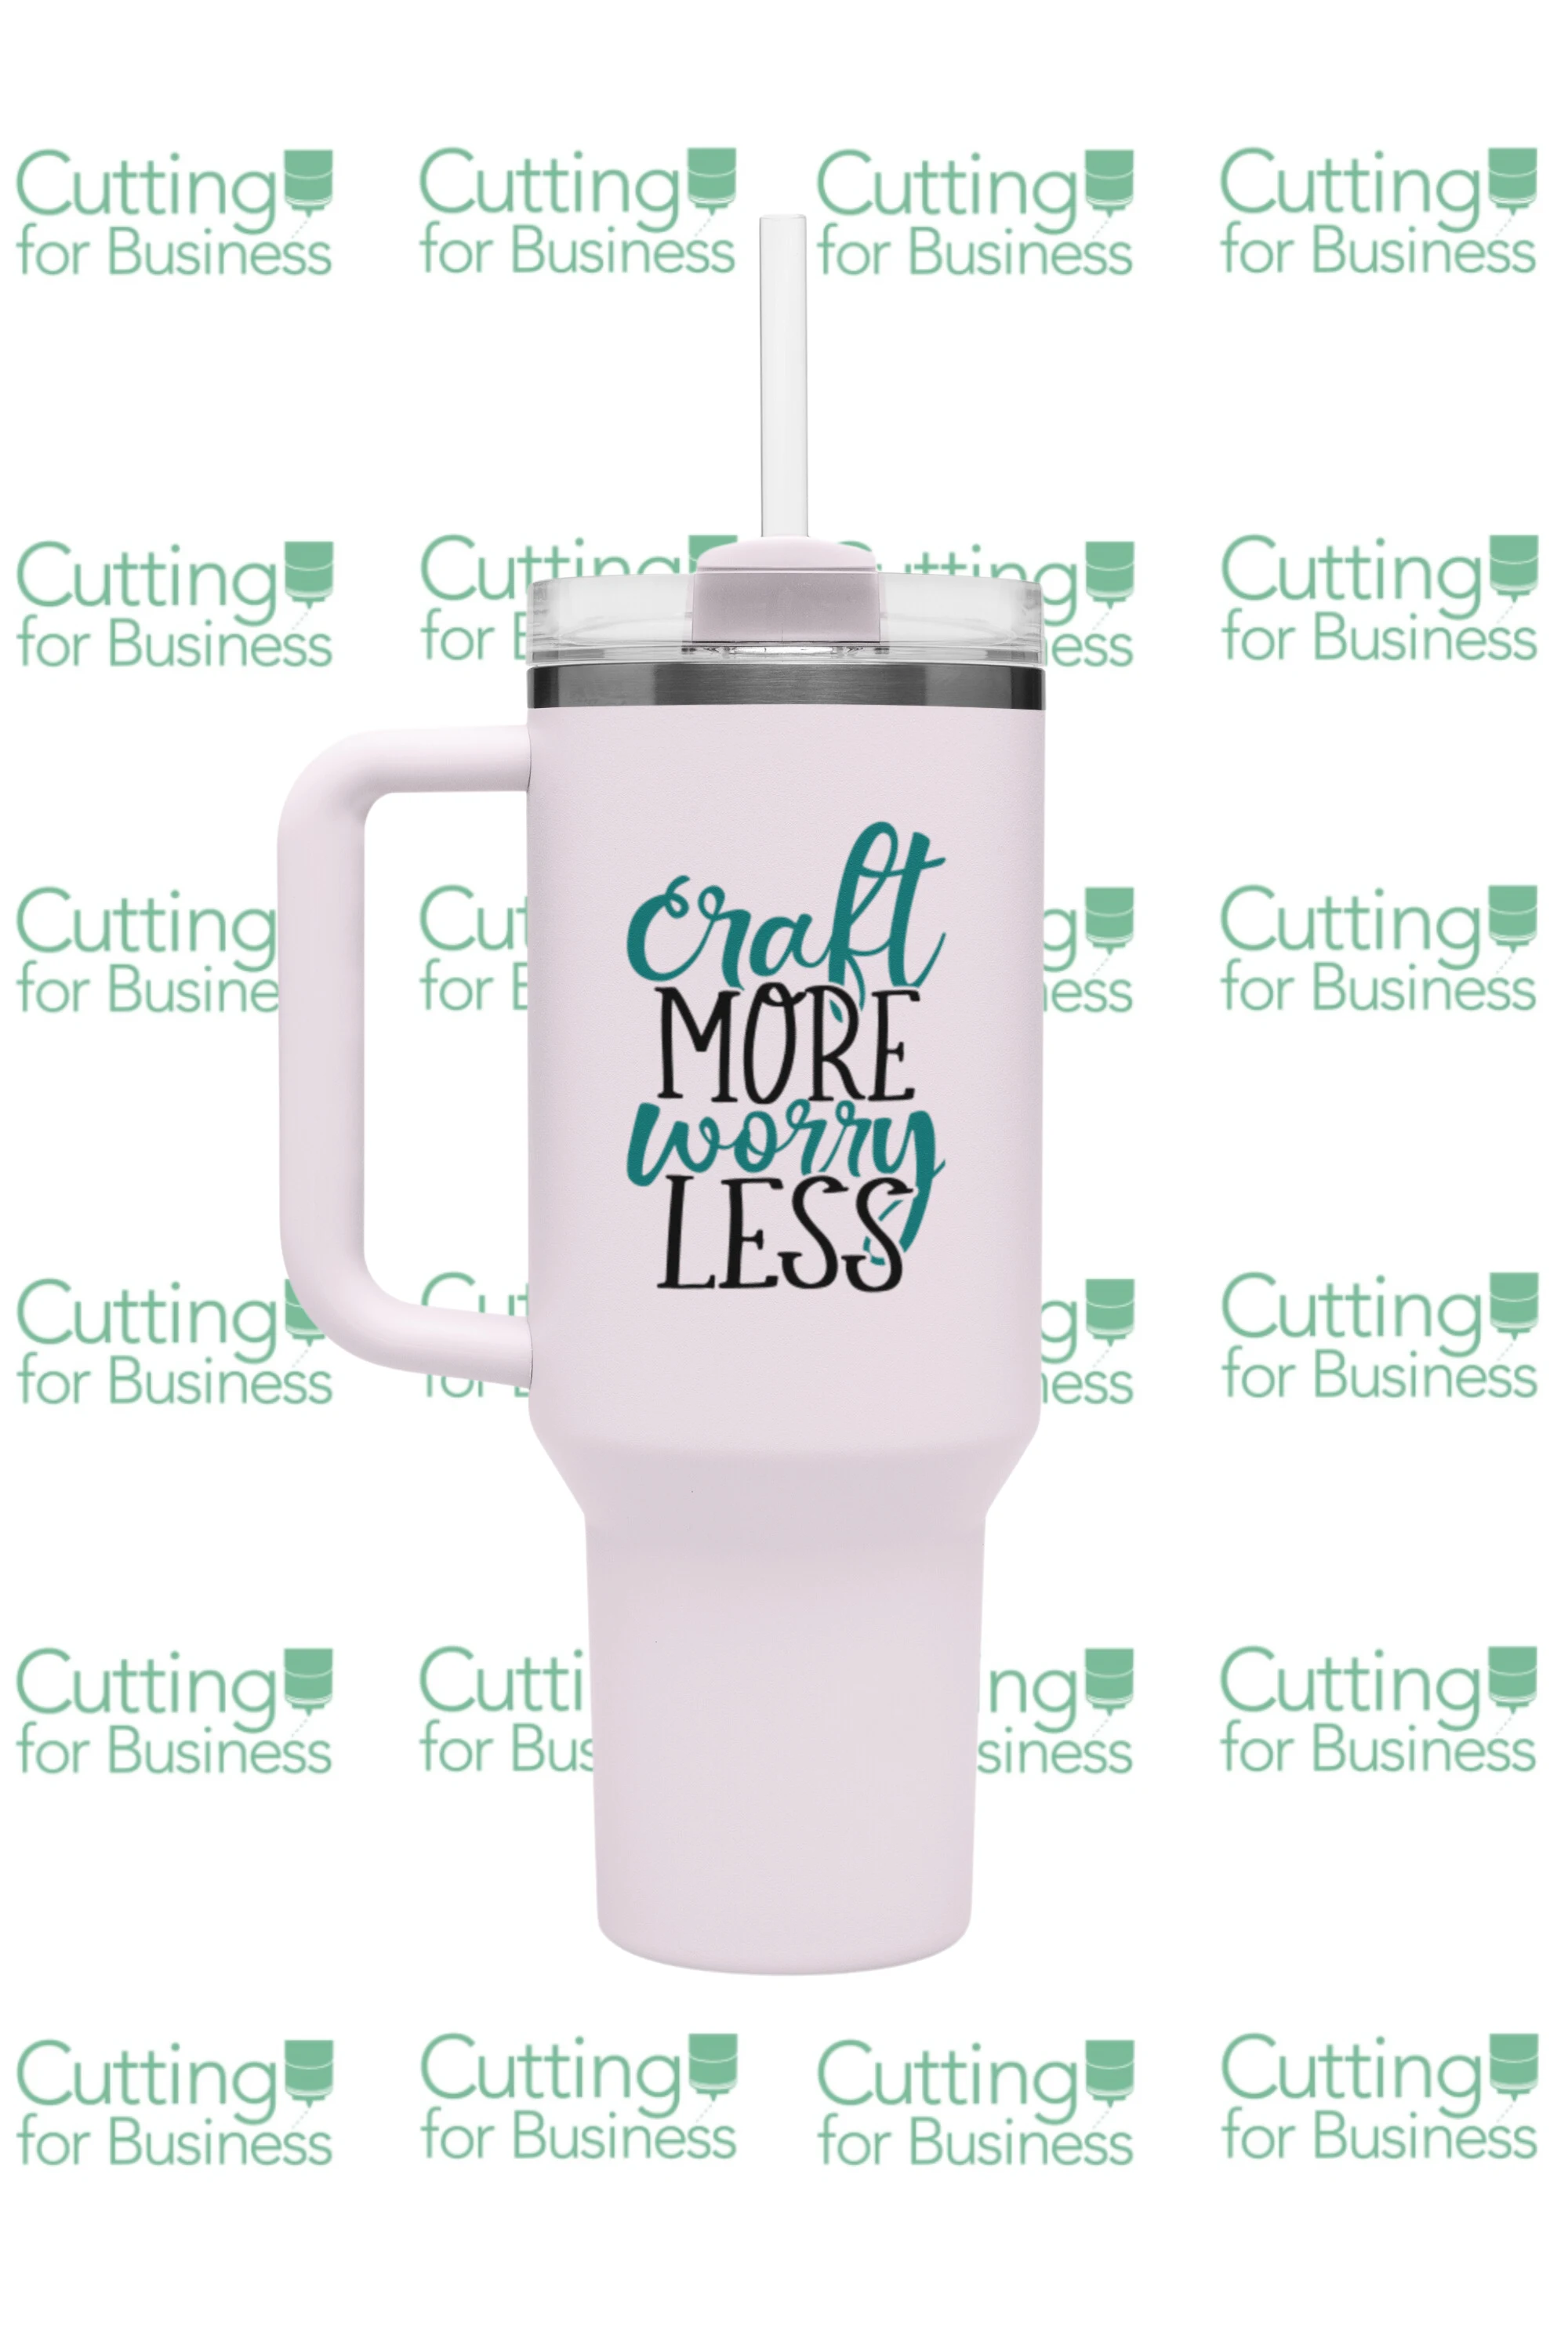 How to Protect Your Product Photos without a Watermark - Example 1 - cuttingforbusiness.com.